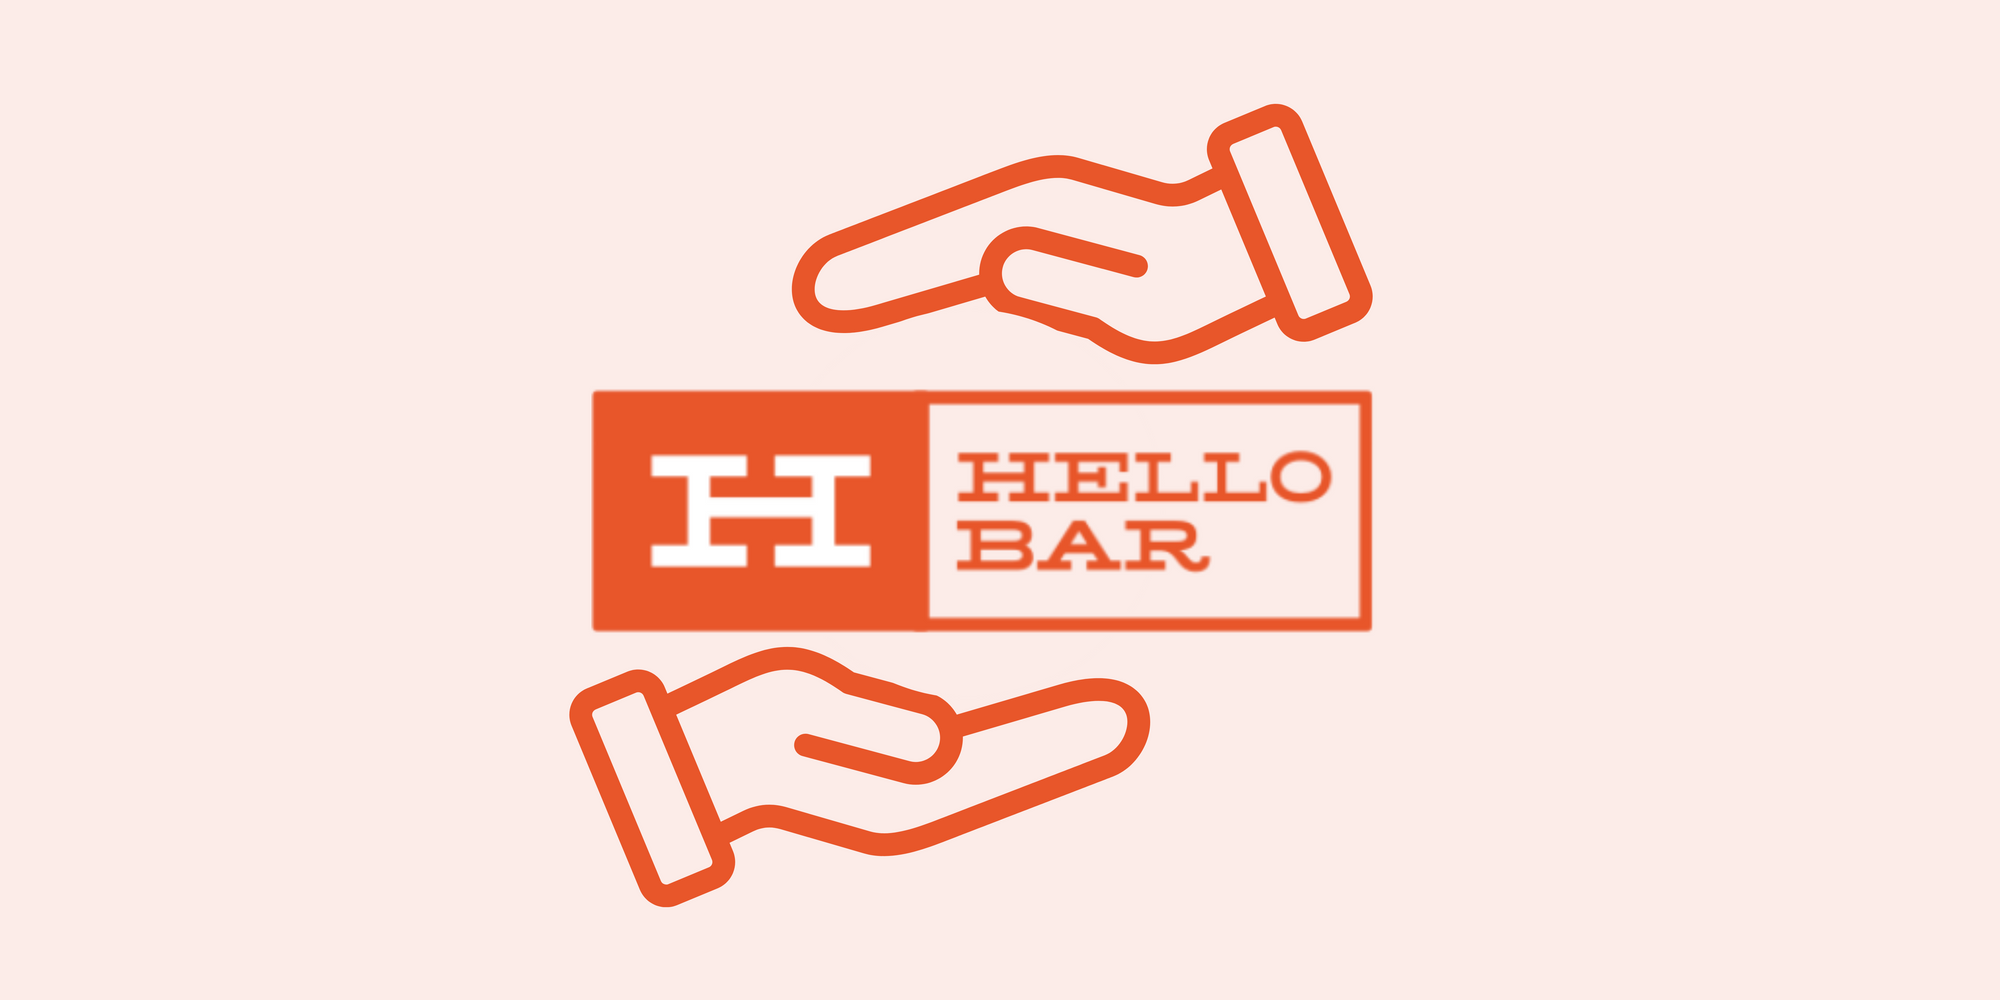 Two hands holding Hello Bar icon without touching on red background